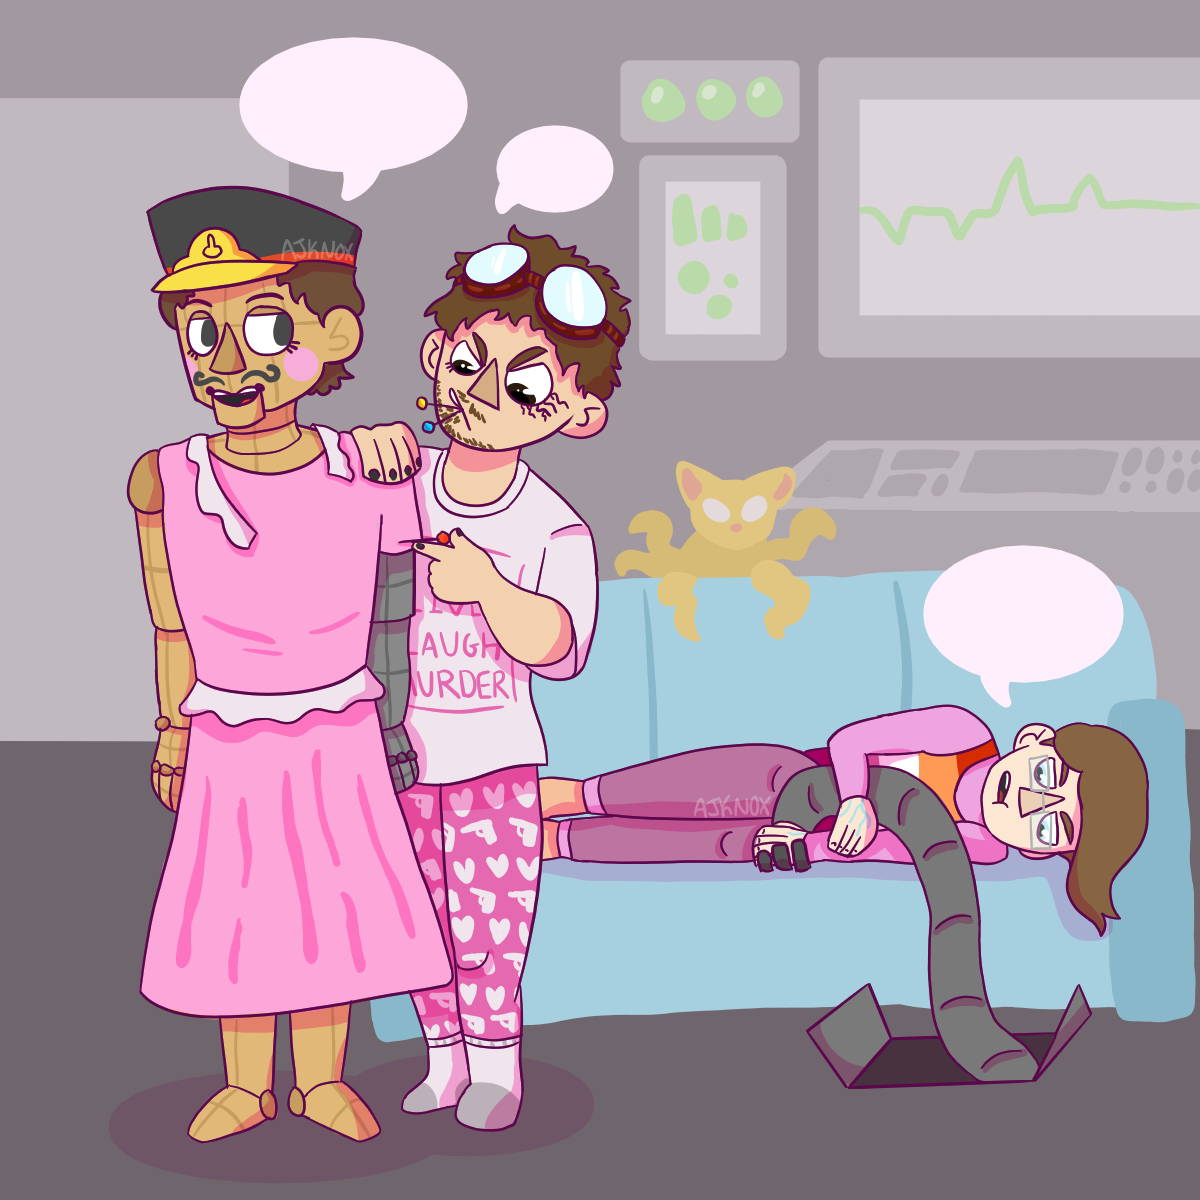 fanart of characters from the mechanisms. jonny d'ville is standing behind the toy soldier, holding sewing pins in his mouth. he's wearing pajamas that say 'live laugh murder' and pink pants adorned with guns and hearts. the toy soldier is acting as a mannequin for jonny, an unfinished dress draping over its body. it's wearing its usual cap and is looking at jonny with a smile. nastya rasputina is further back, laying on a couch and cuddling a mechanical arm. her pajamas are pink and the shirt has the lesbian flag on it. there's an octokitten lurking over the couch.